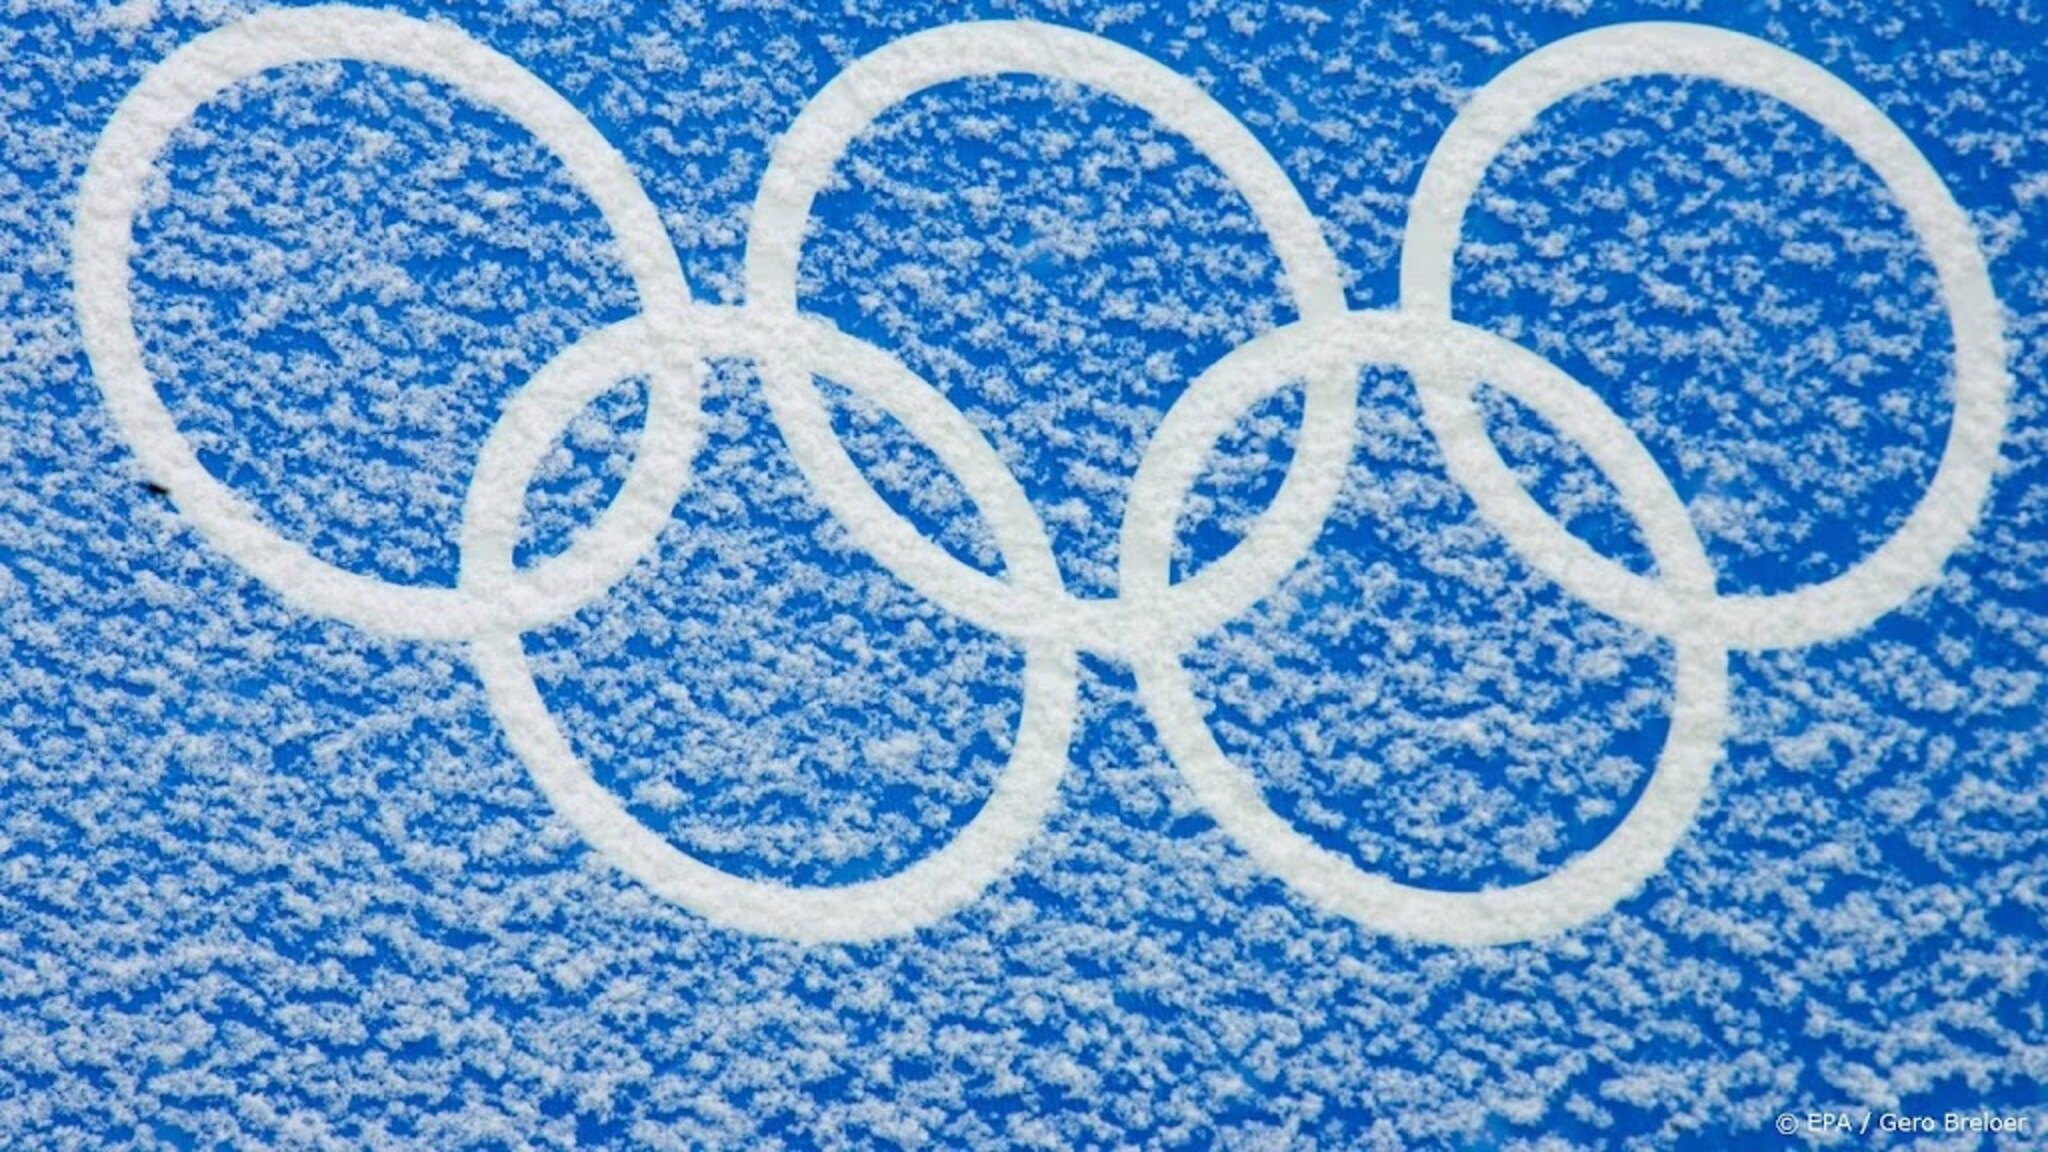 Arrests in Athens to protest against the Beijing Olympics